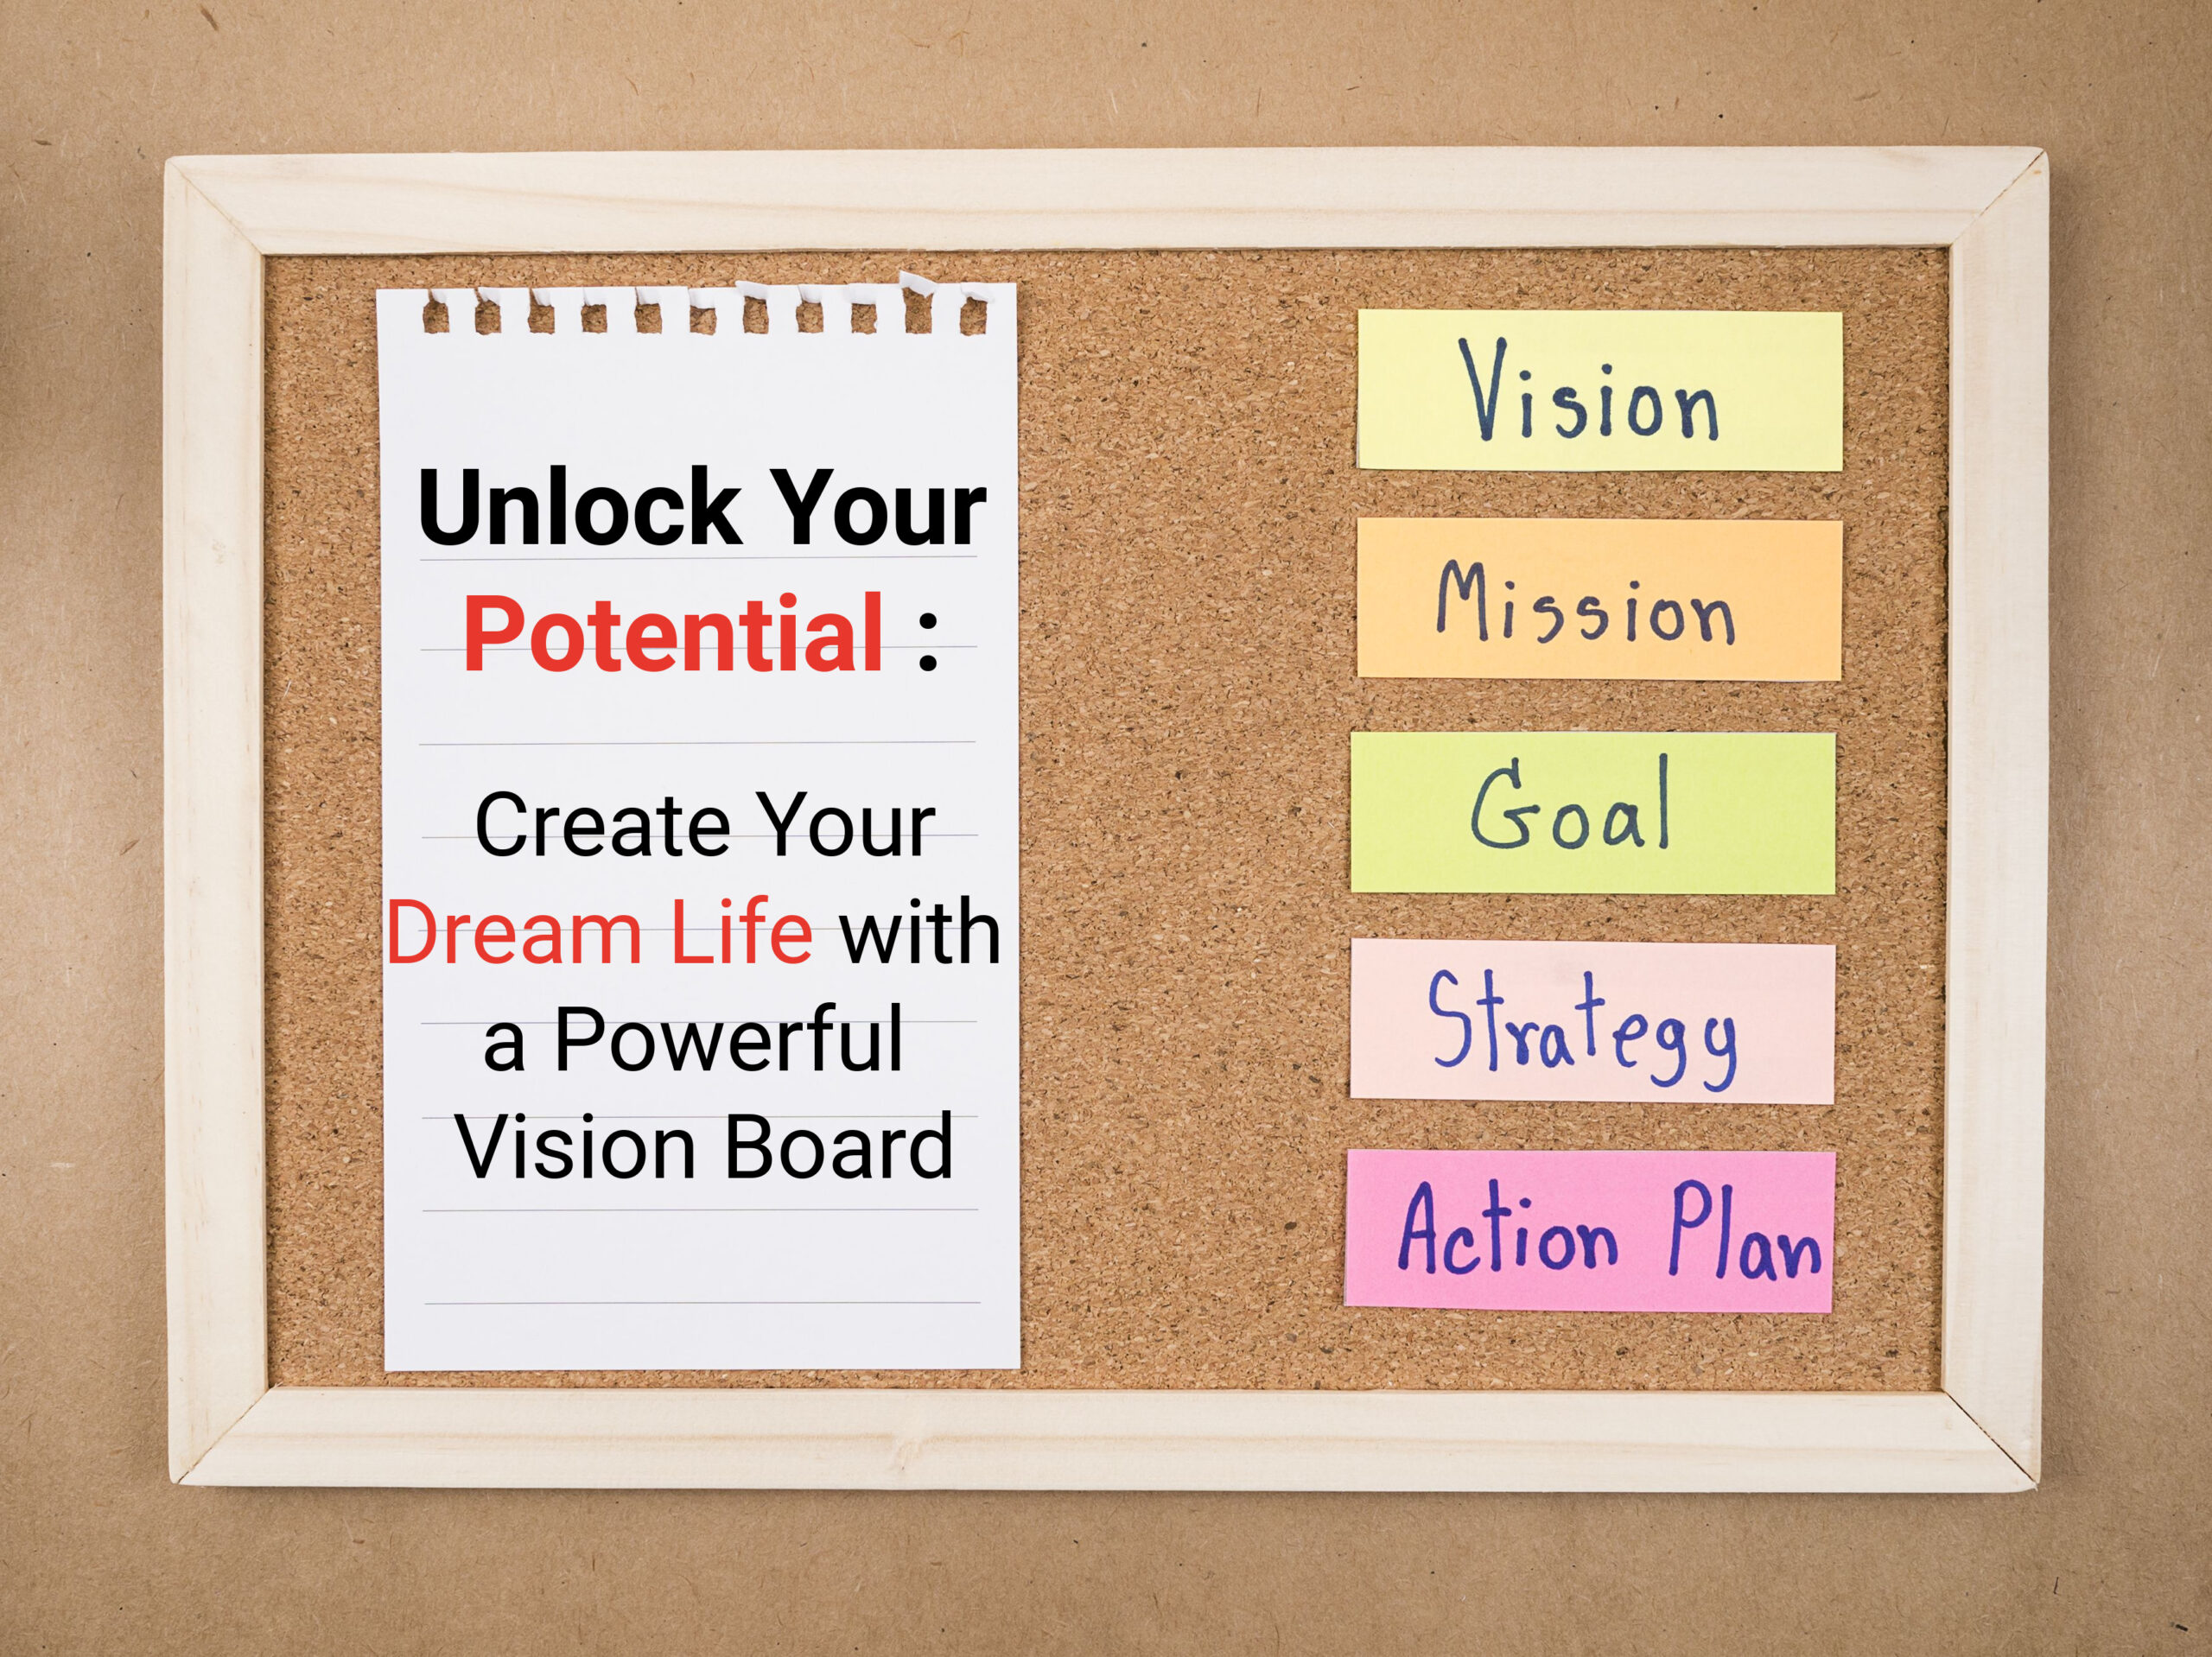 Vision board ideas are powerful visualization catalysts for accomplishing goals